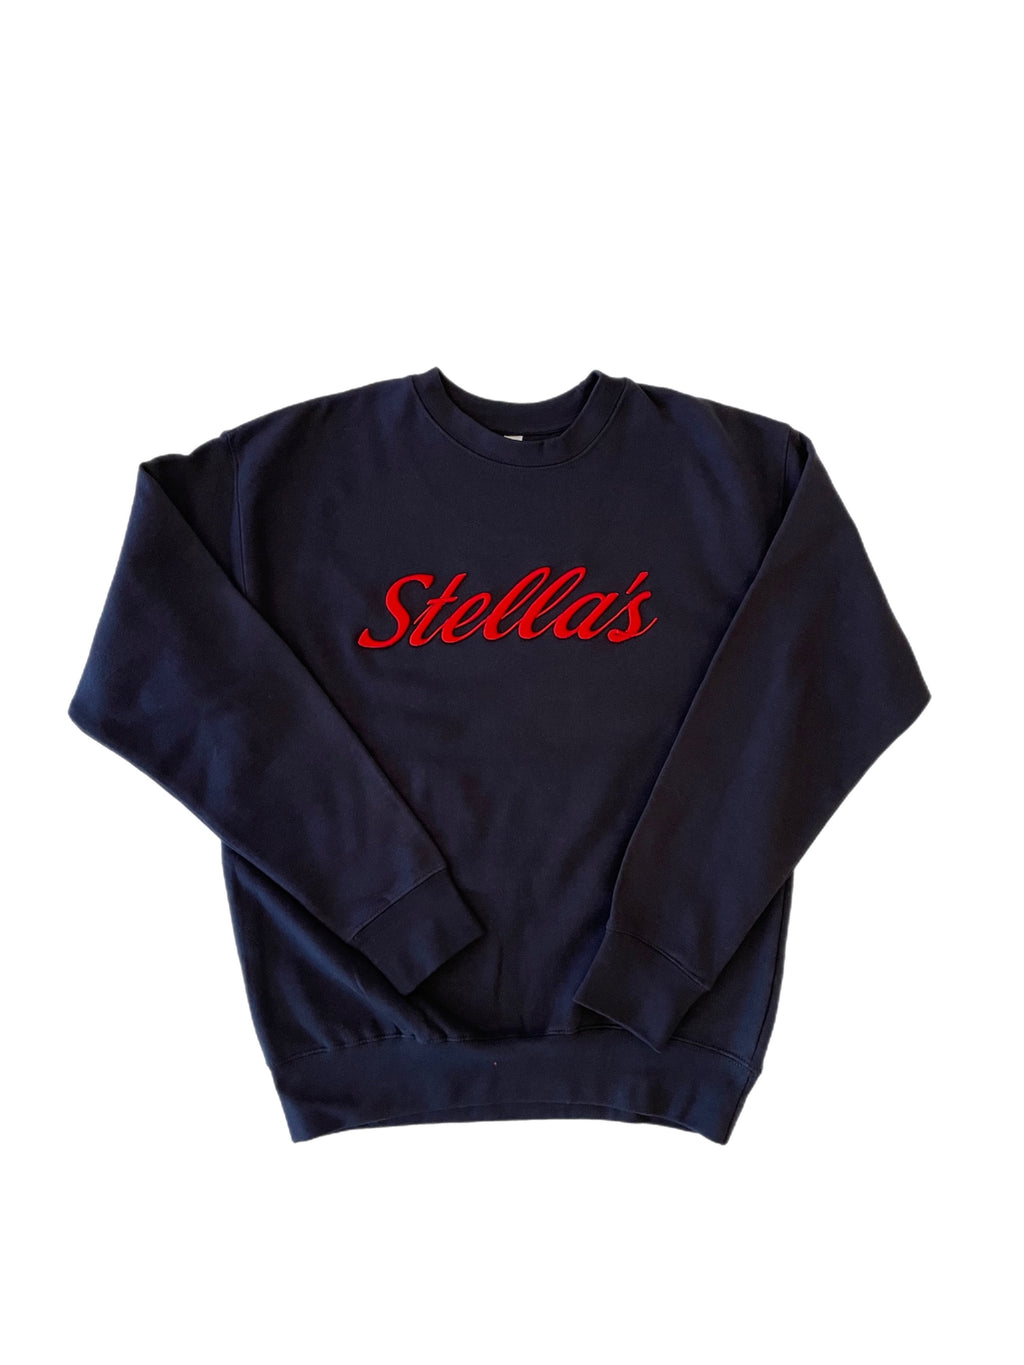 Stella's Embroidered Crewneck Sweatshirt in Navy with Red Embroidery